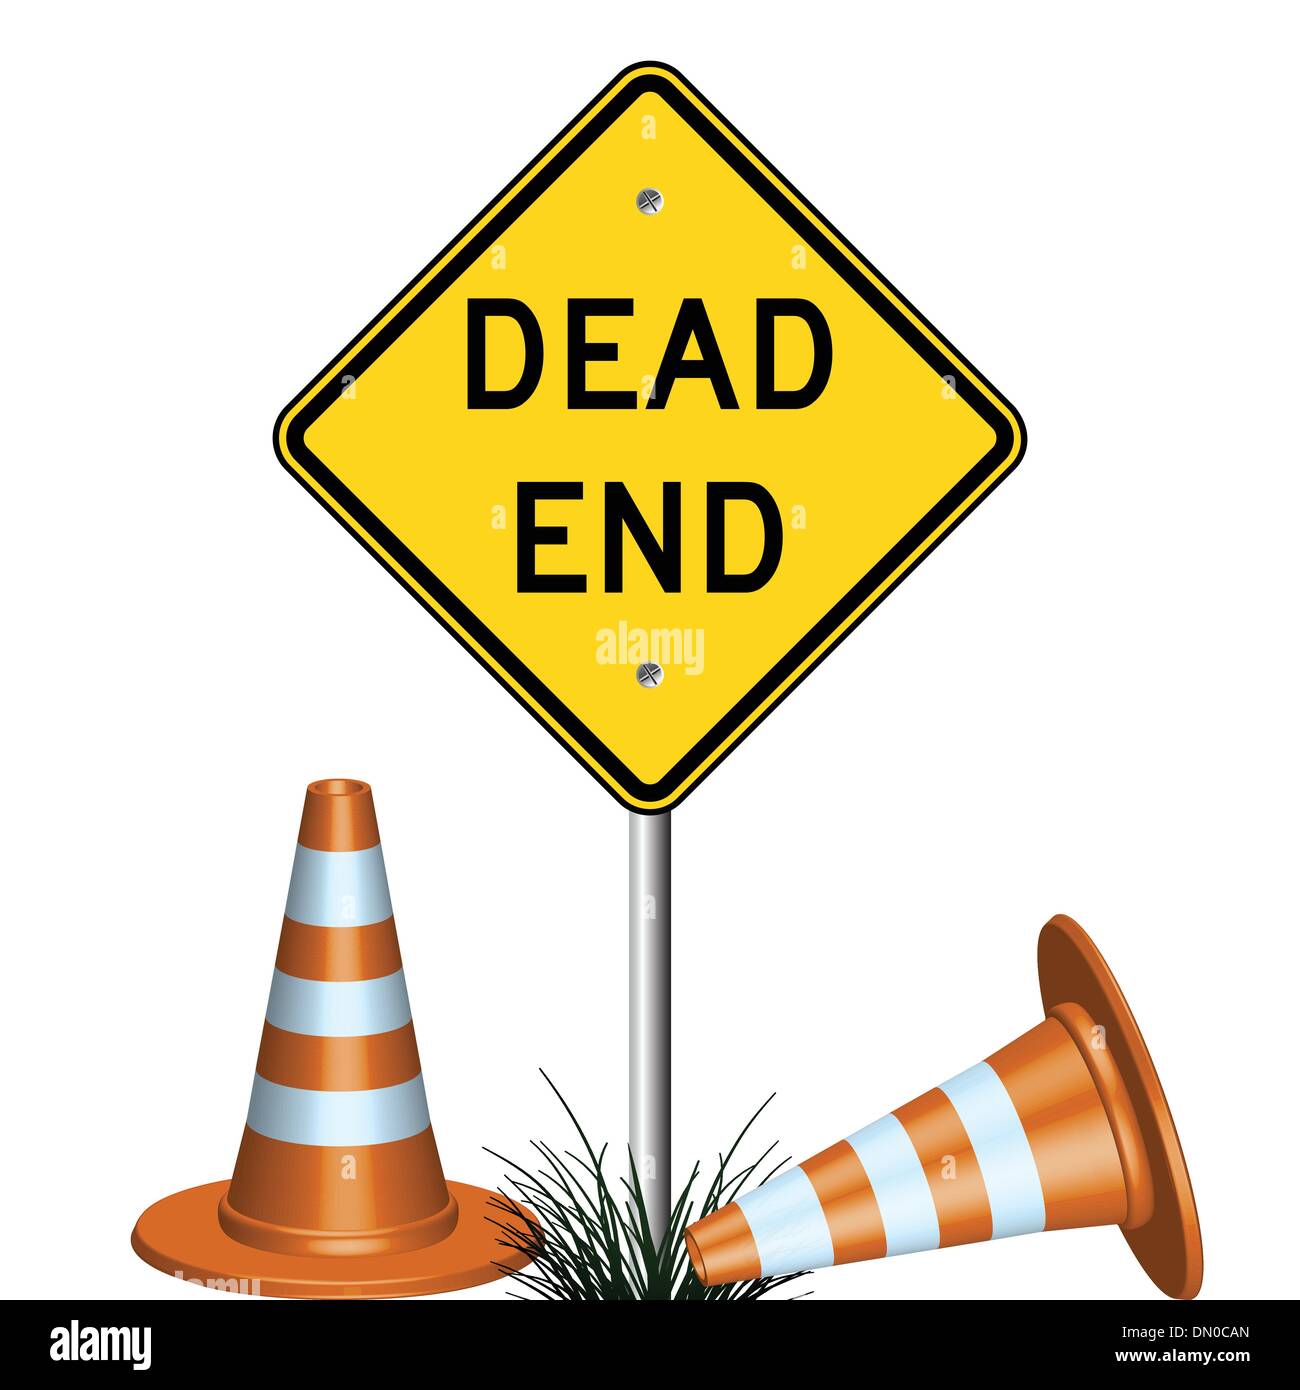 Dead End (with graphic symbol)